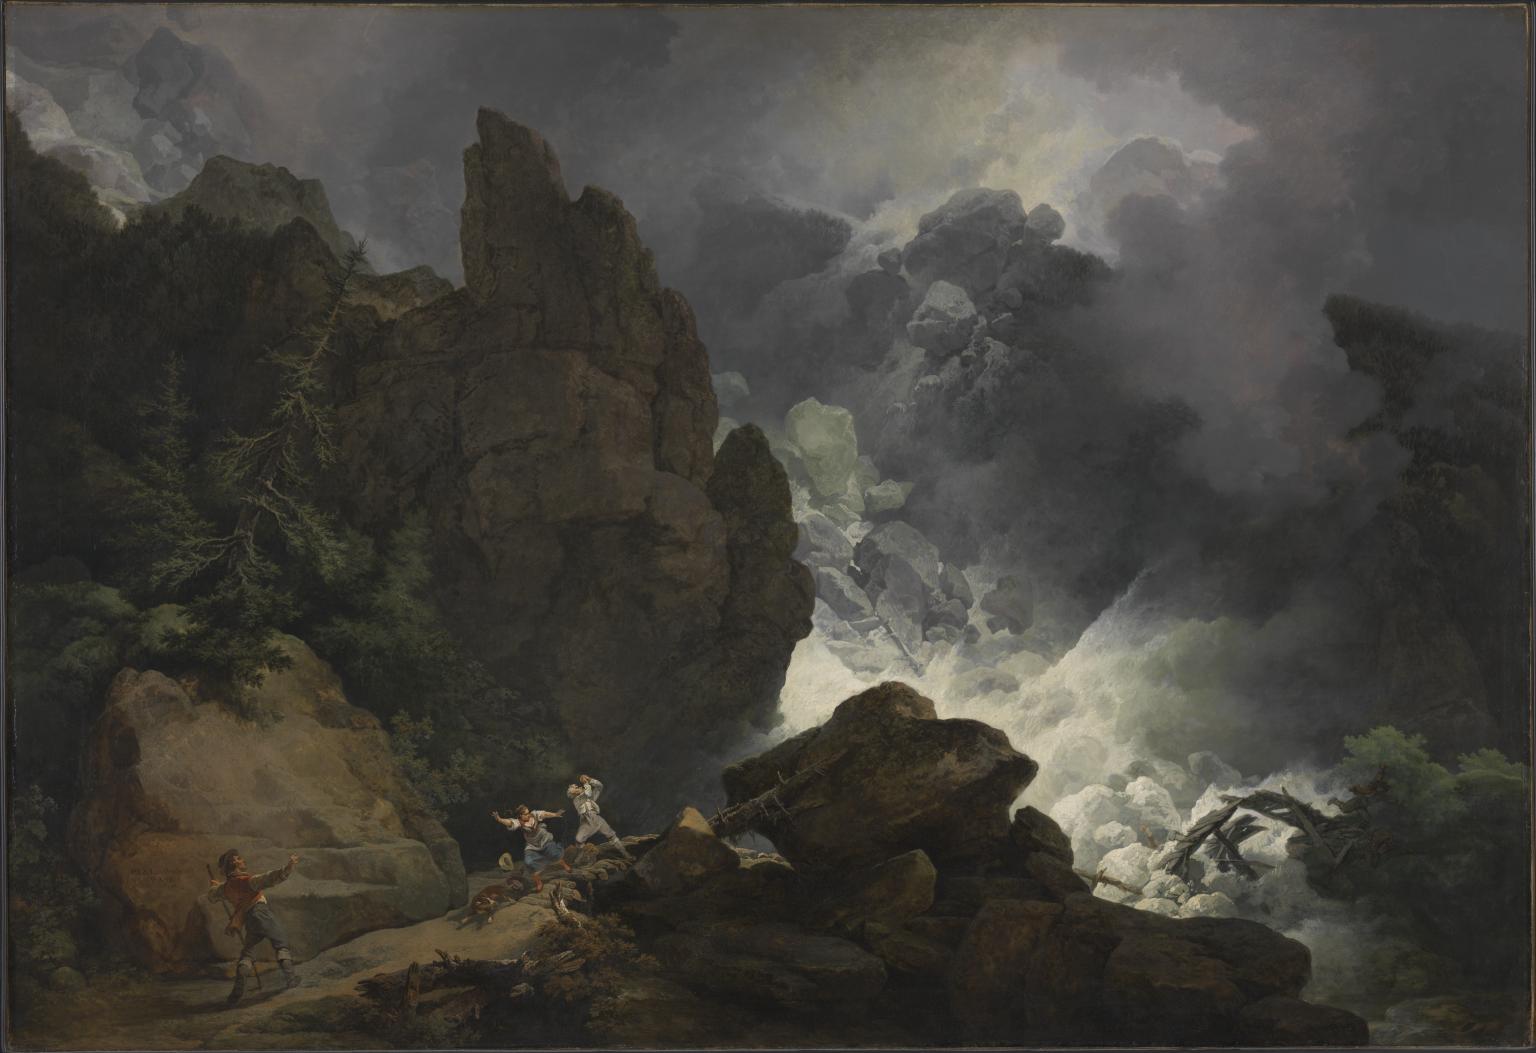 “An Avalanche in the Alps” Phillip James De Loutherbourg (1803)